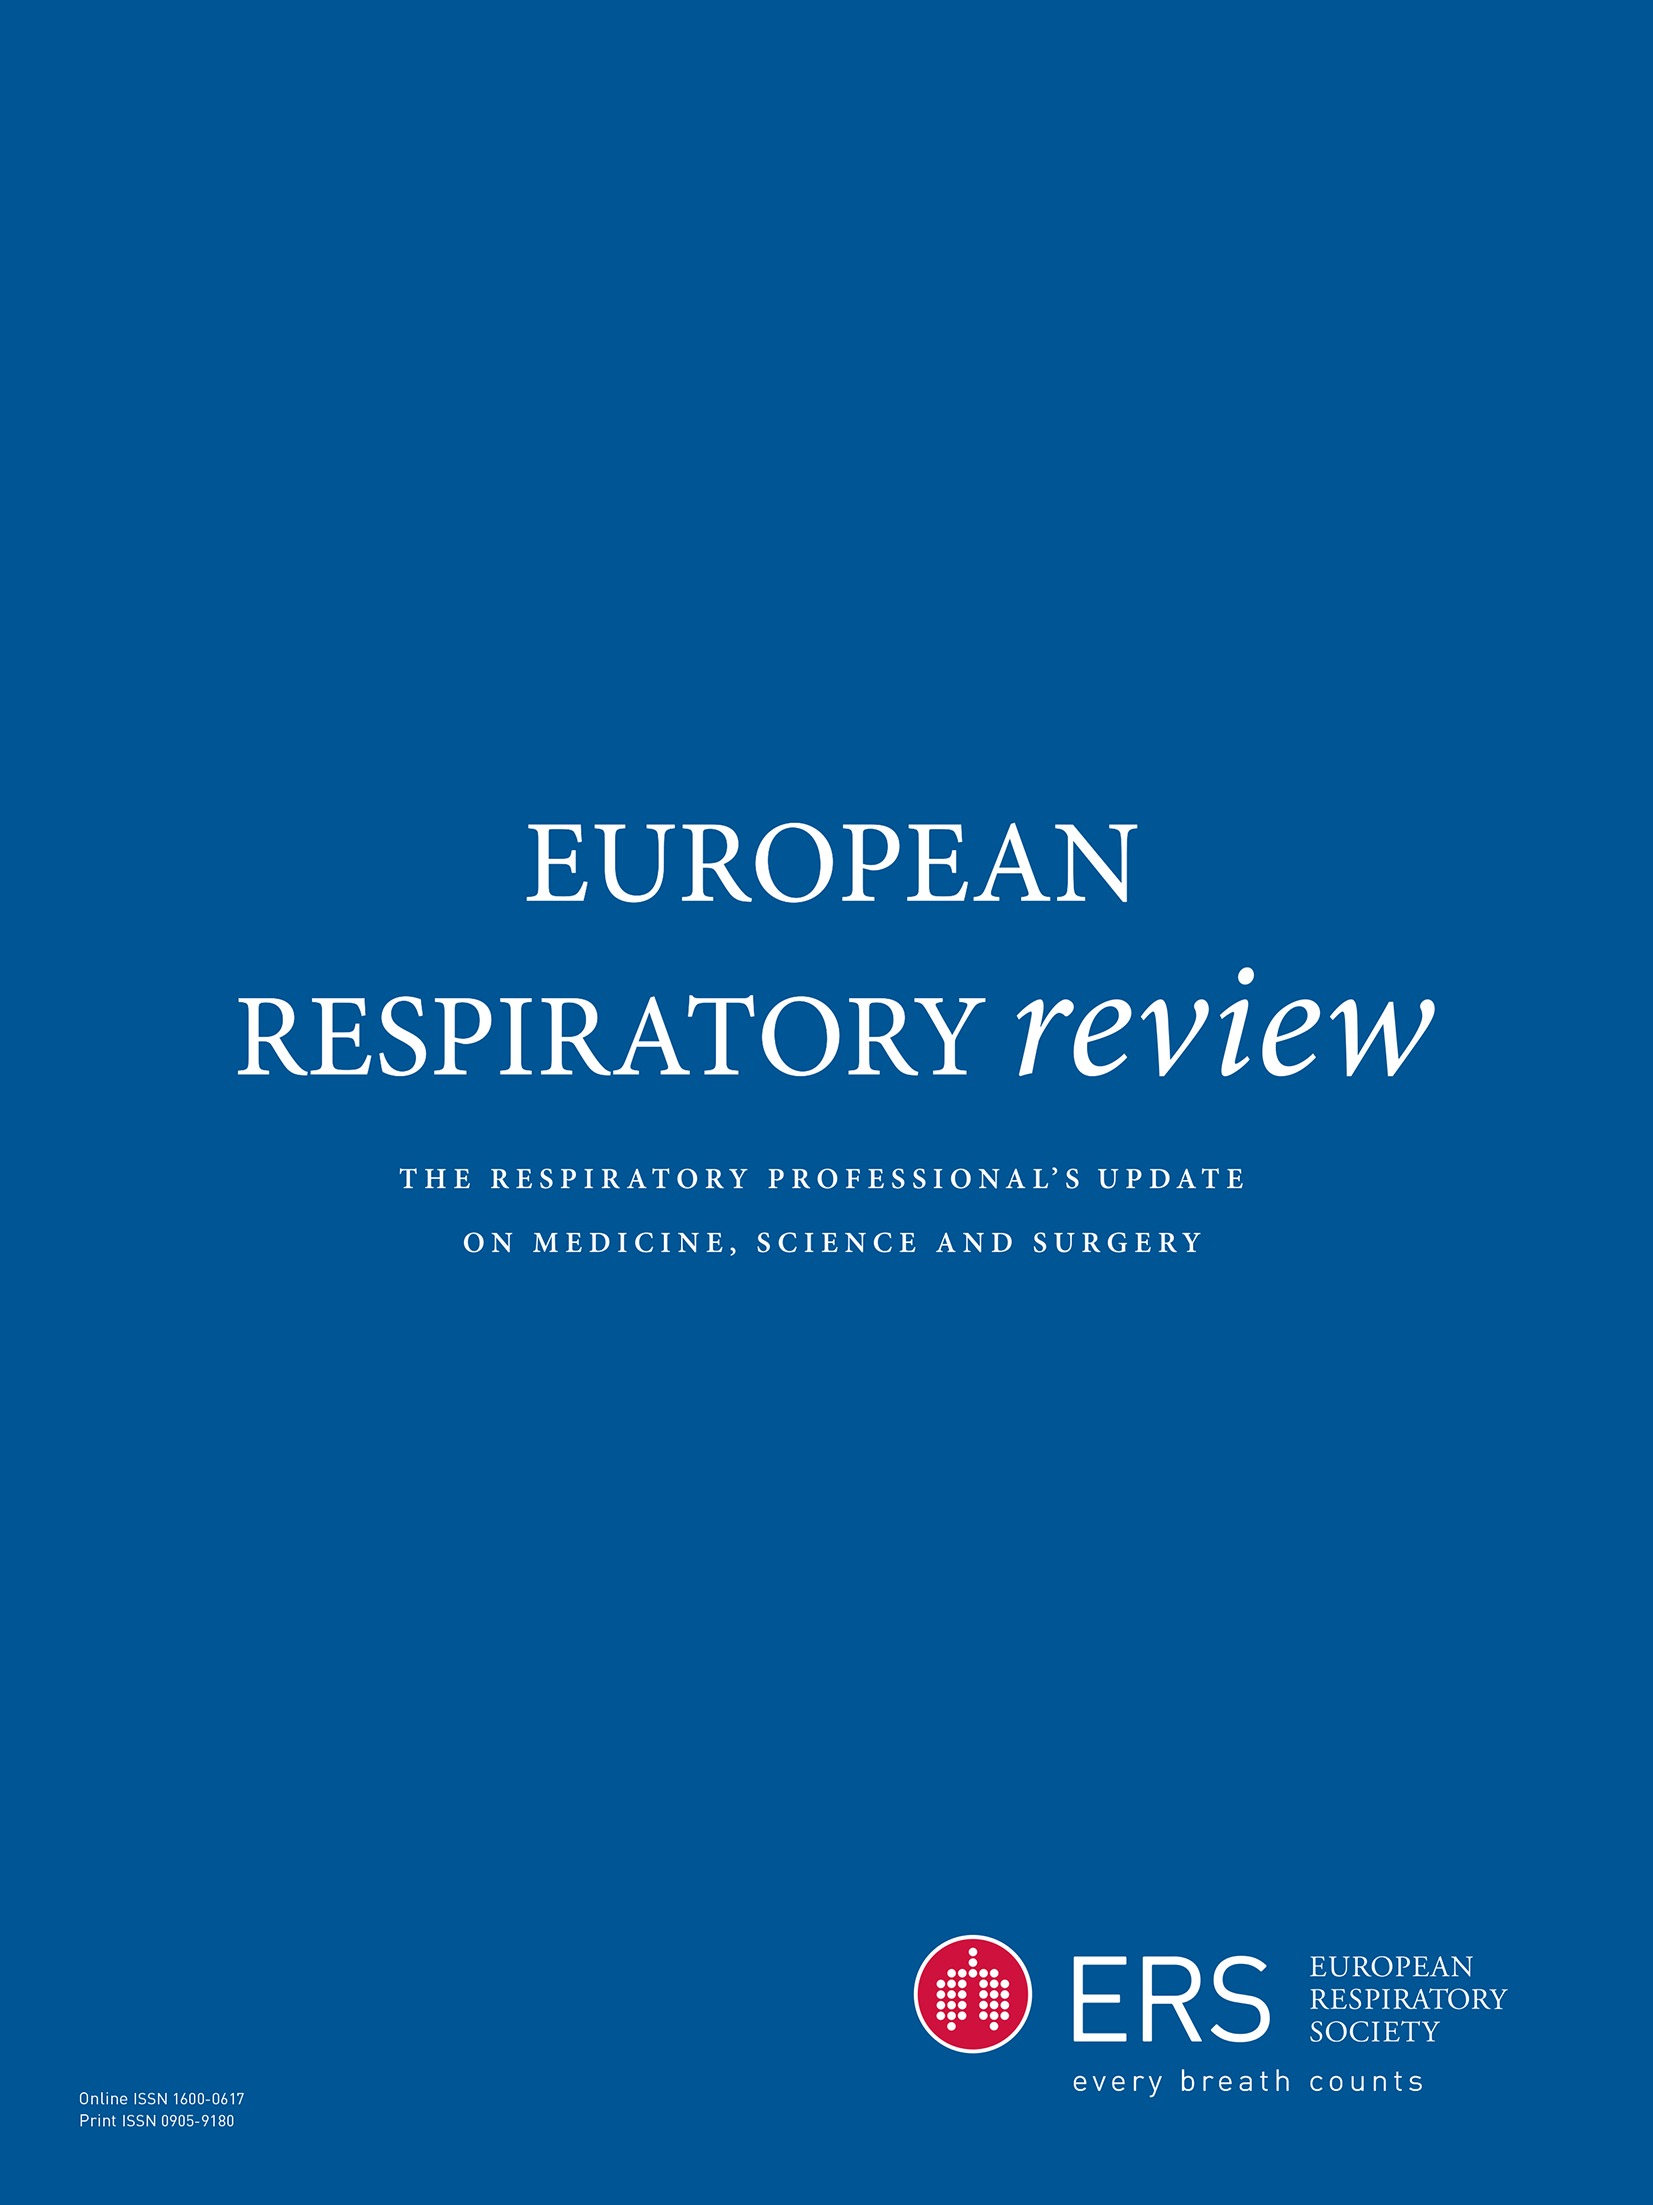 Airway ciliated cells in adult lung homeostasis and COPD